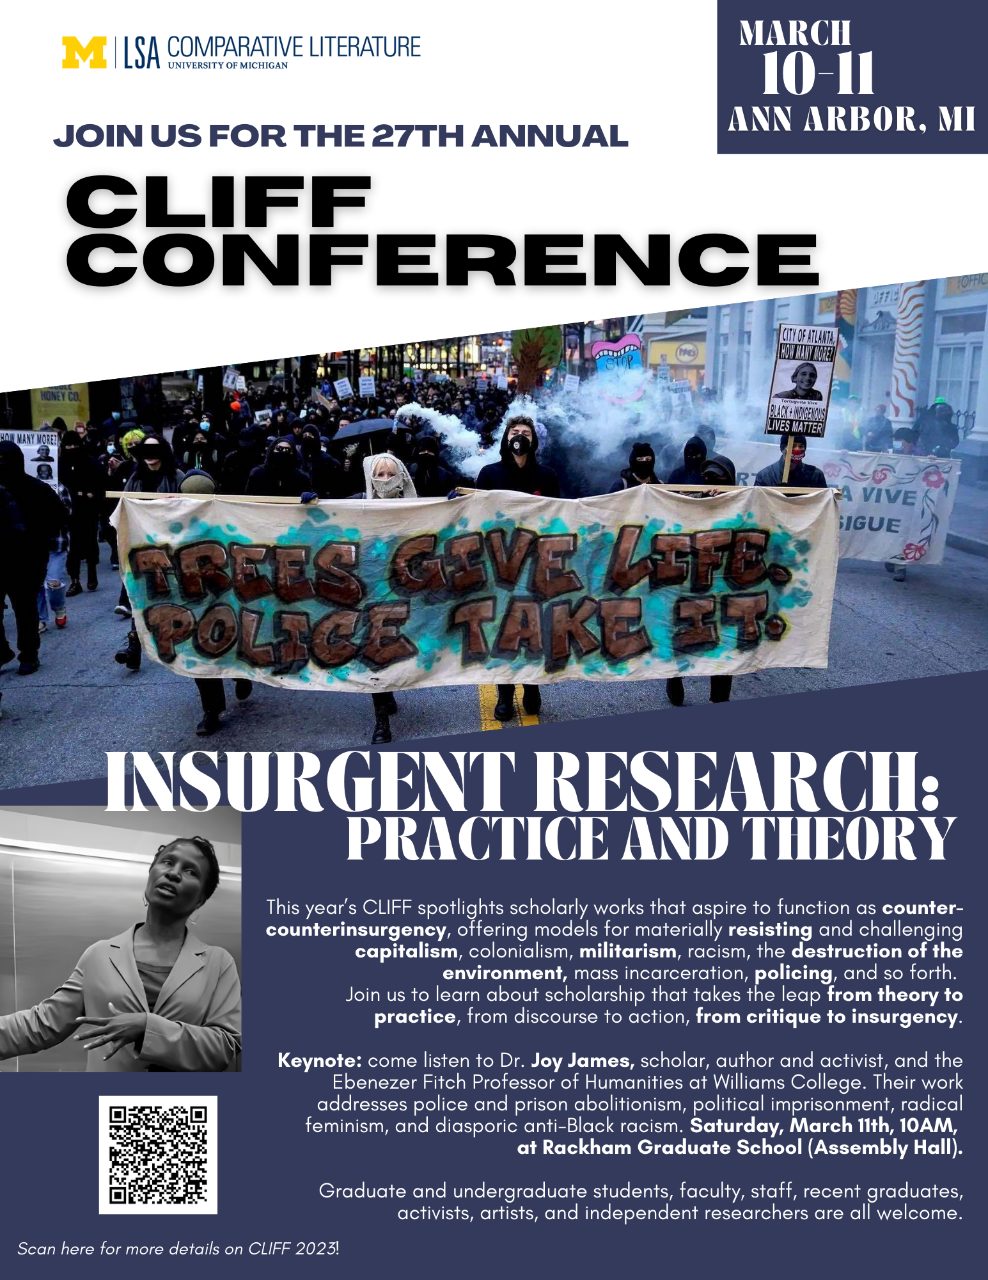 Text, “Join us for the 27th annual CLIFF Conference, March 10-11, Ann Arbor, MI. Insurgent Research: Practice and Theory. This year’s CLIFF spotlights scholarly works that aspire to function as counter-counterinsurgency, offering models for materially resisting and challenging capitalism, colonialism, militarism, racism, and the destruction of the environment, mass incarceration, policing, and so forth. Join us to learn about scholarship that takes the leap from theory to practice, from discourse to action, from critique to insurgency. Keynote: come listen to Dr. Joy James, scholar, author and activist, and the Ebenezer Fitch Professor of Humanities at Williams College. Their work addresses police and prison abolitionism, political imprisonment, radical feminism, and diasporic anti-Black racism. Saturday March 11th, 10AM, at Rackham Graduate School (Assembly Hall). Graduate and undergraduate students, faculty, staff, recent graduates, activists, artists, and independent researchers are all welcome.”